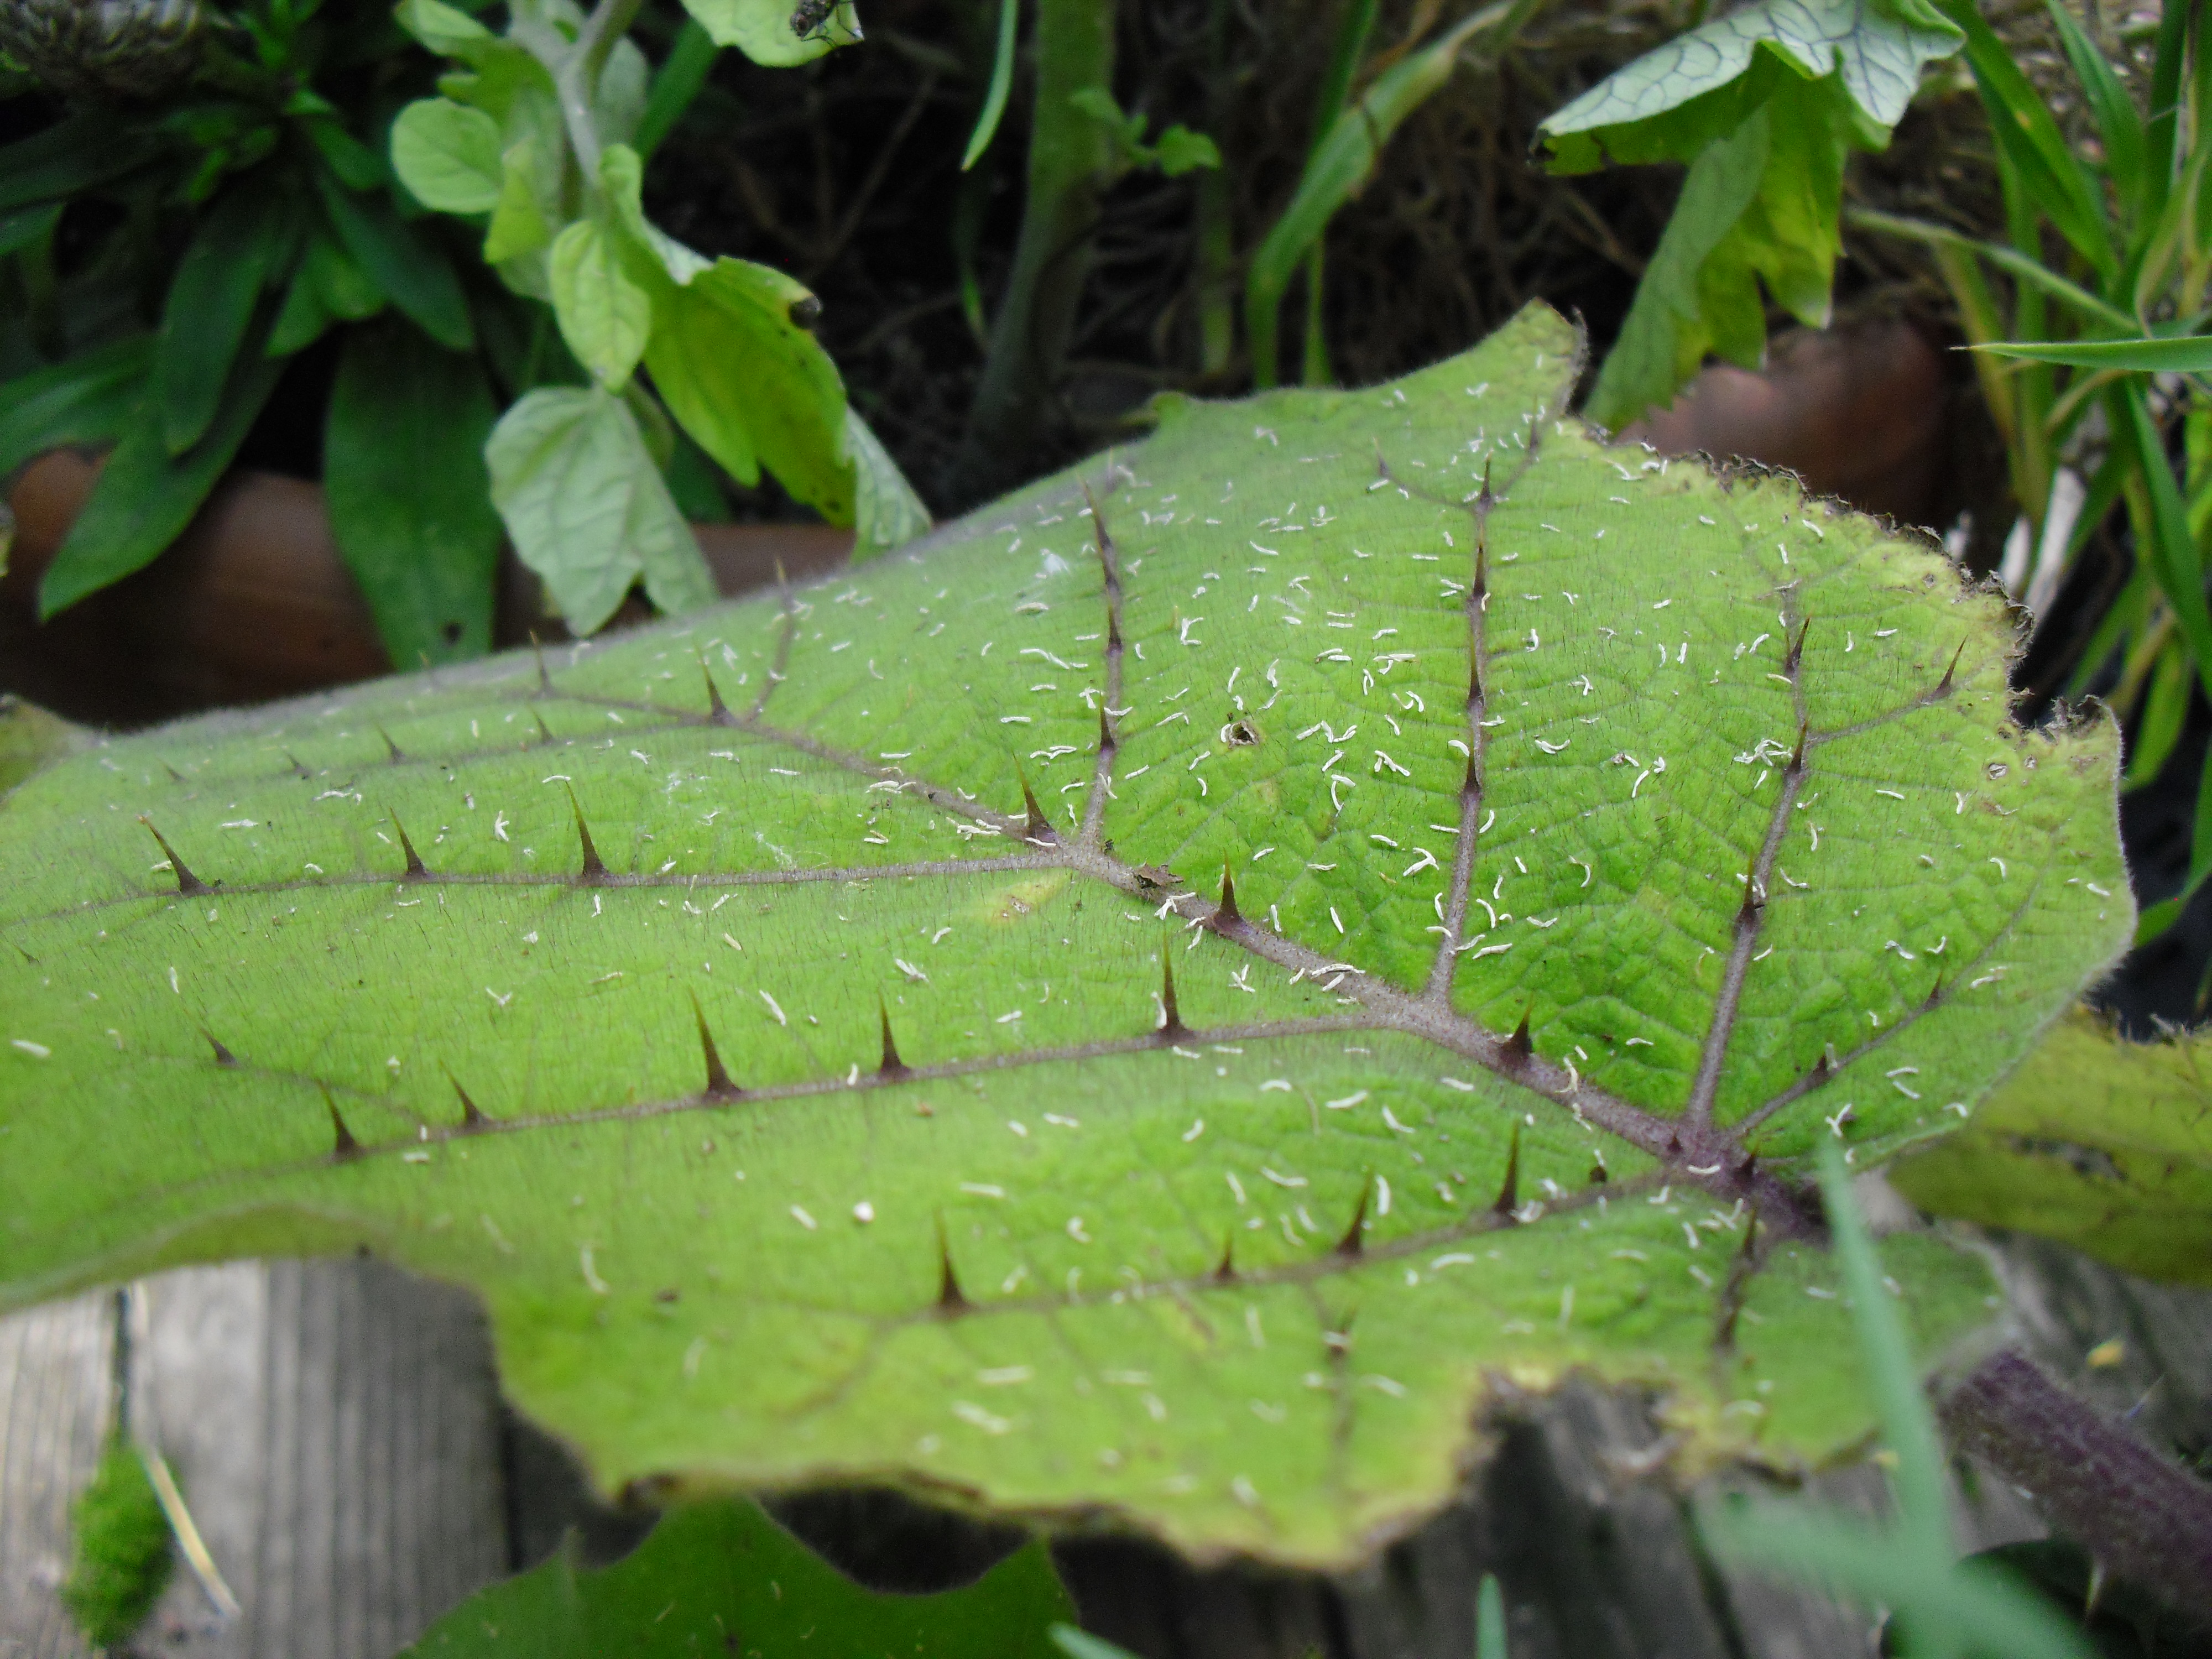 PHOTO: this close up of a naranjillo leaf shows sharp thorns sticking up from the veins of the leaf.